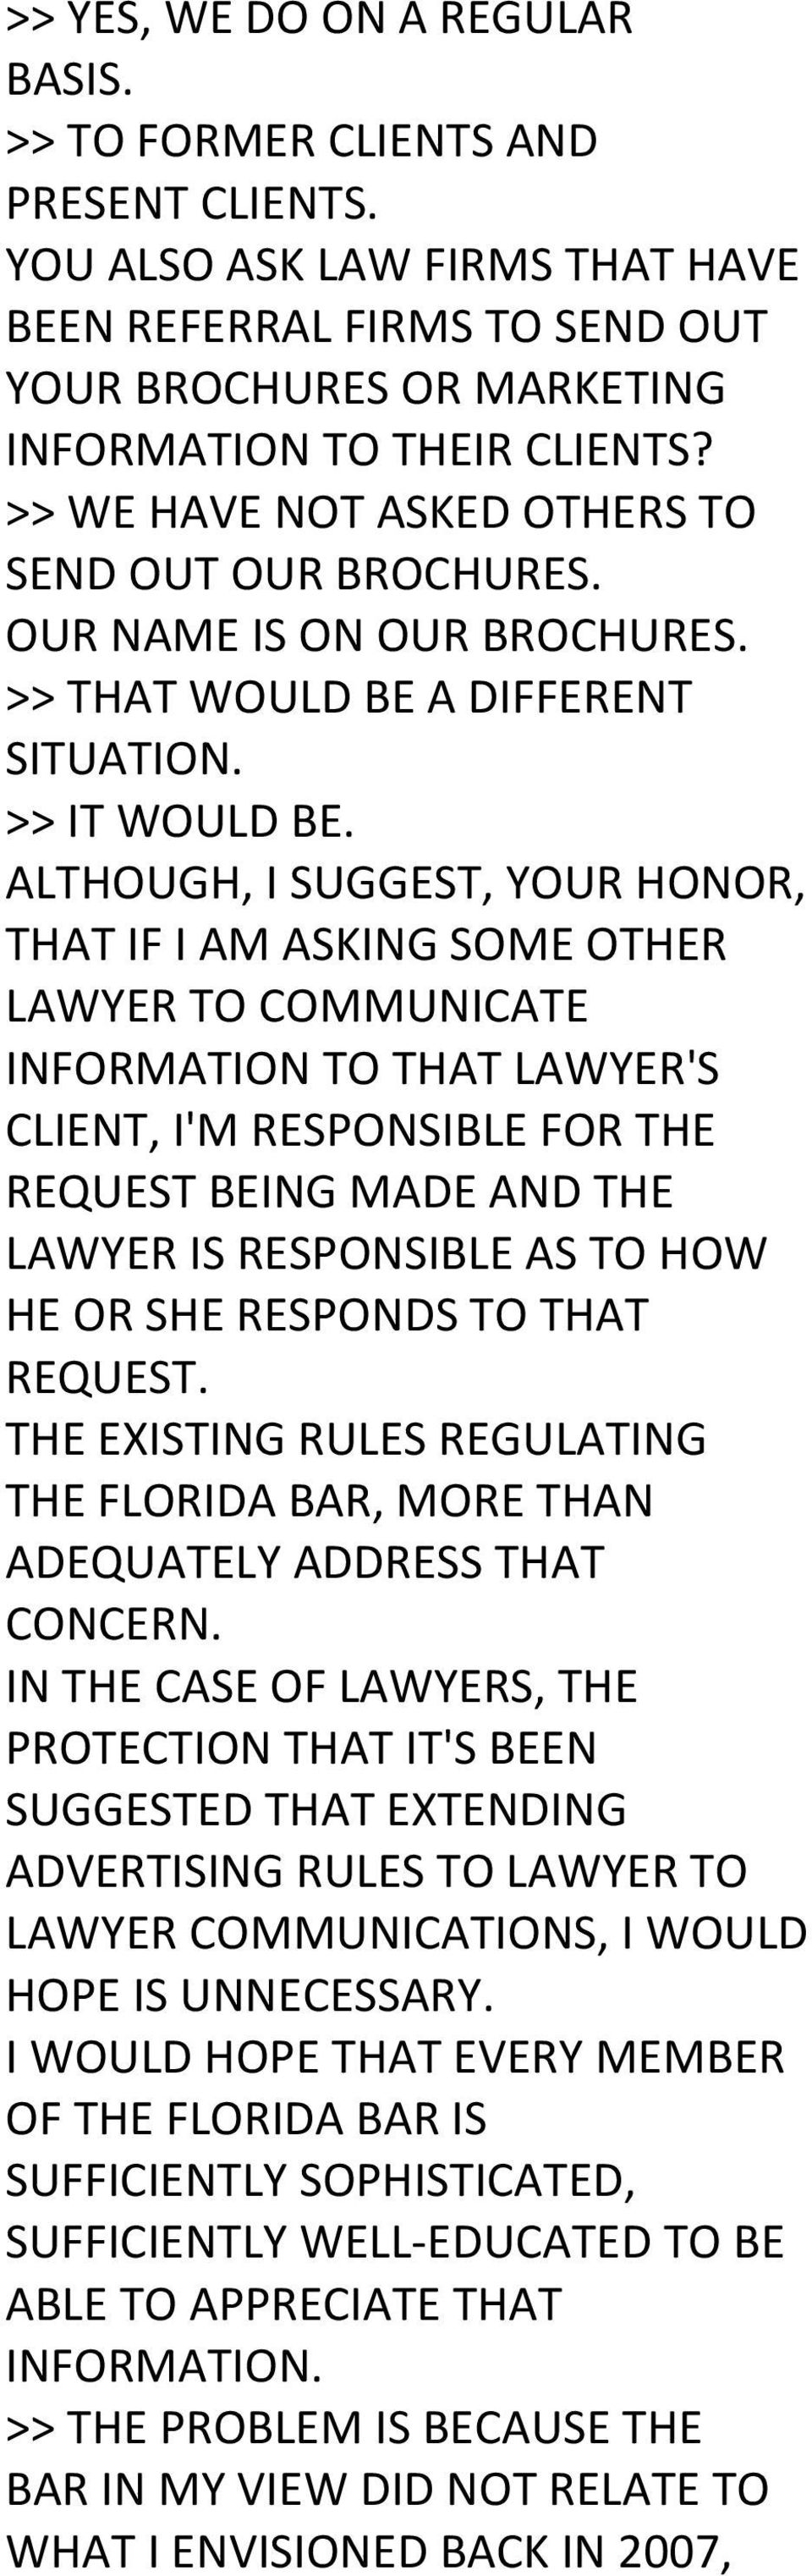 ALTHOUGH, I SUGGEST, YOUR HONOR, THAT IF I AM ASKING SOME OTHER LAWYER TO COMMUNICATE INFORMATION TO THAT LAWYER'S CLIENT, I'M RESPONSIBLE FOR THE REQUEST BEING MADE AND THE LAWYER IS RESPONSIBLE AS